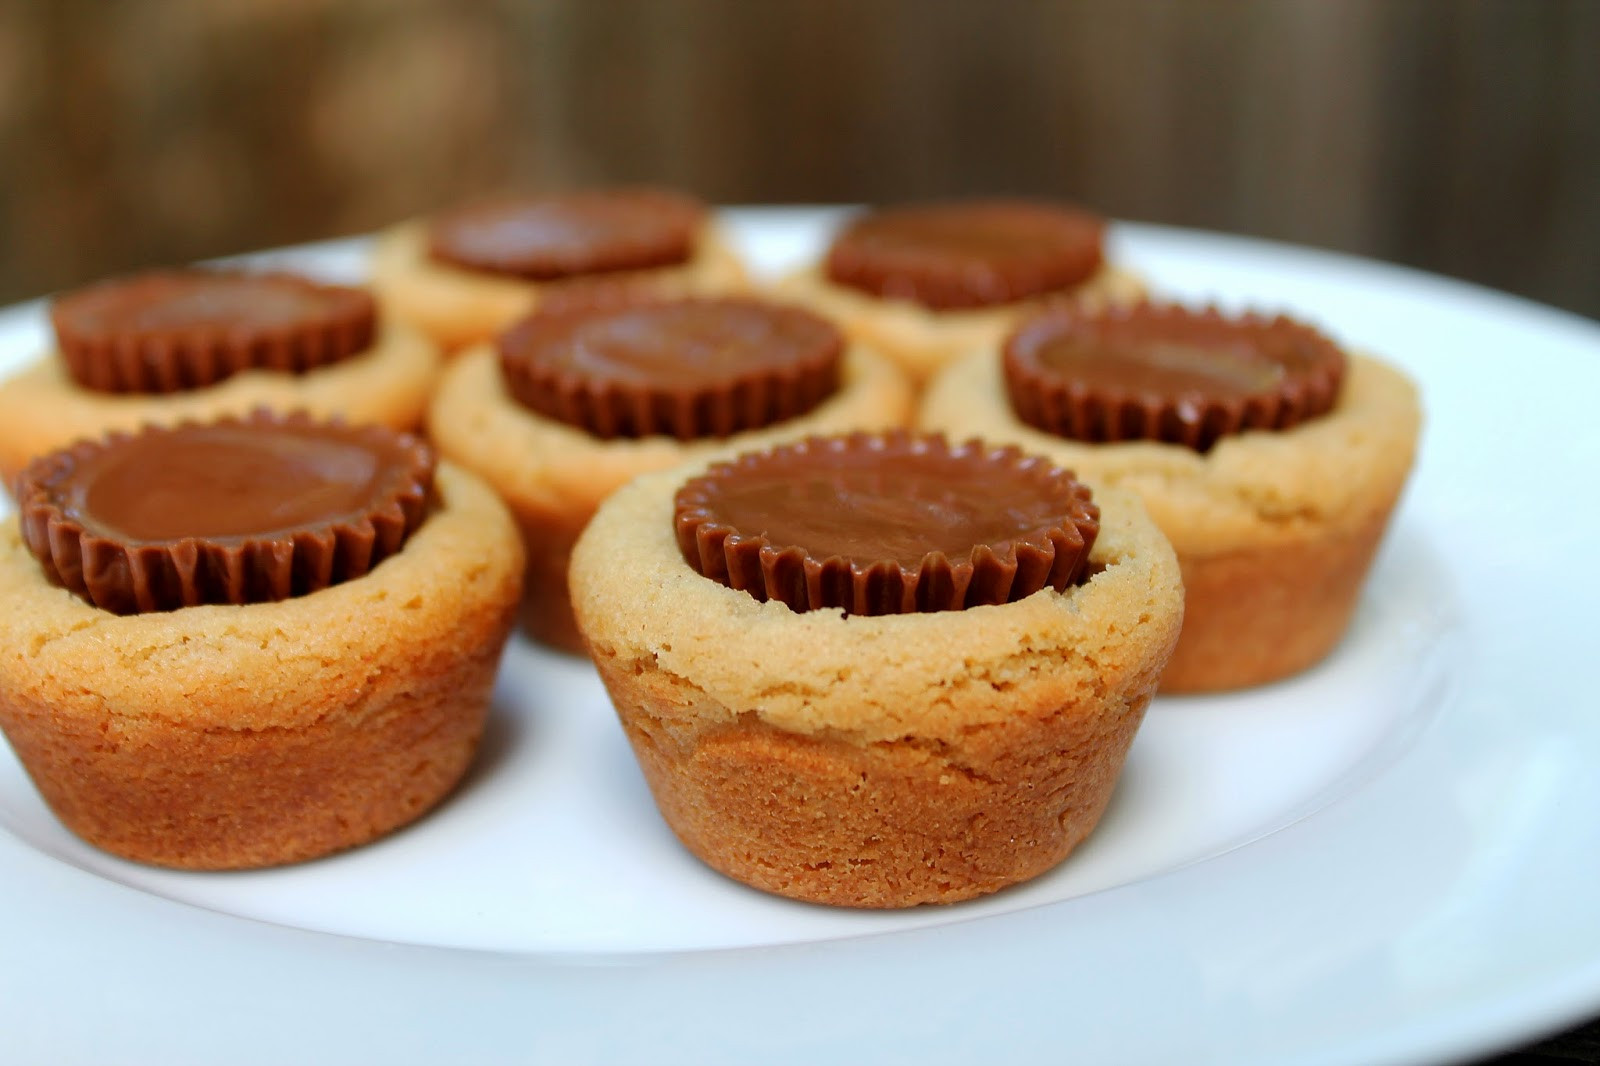 Reese Peanut Butter Cup Cookies
 The Dinner Club Reese s Peanut Butter Cup Cookies